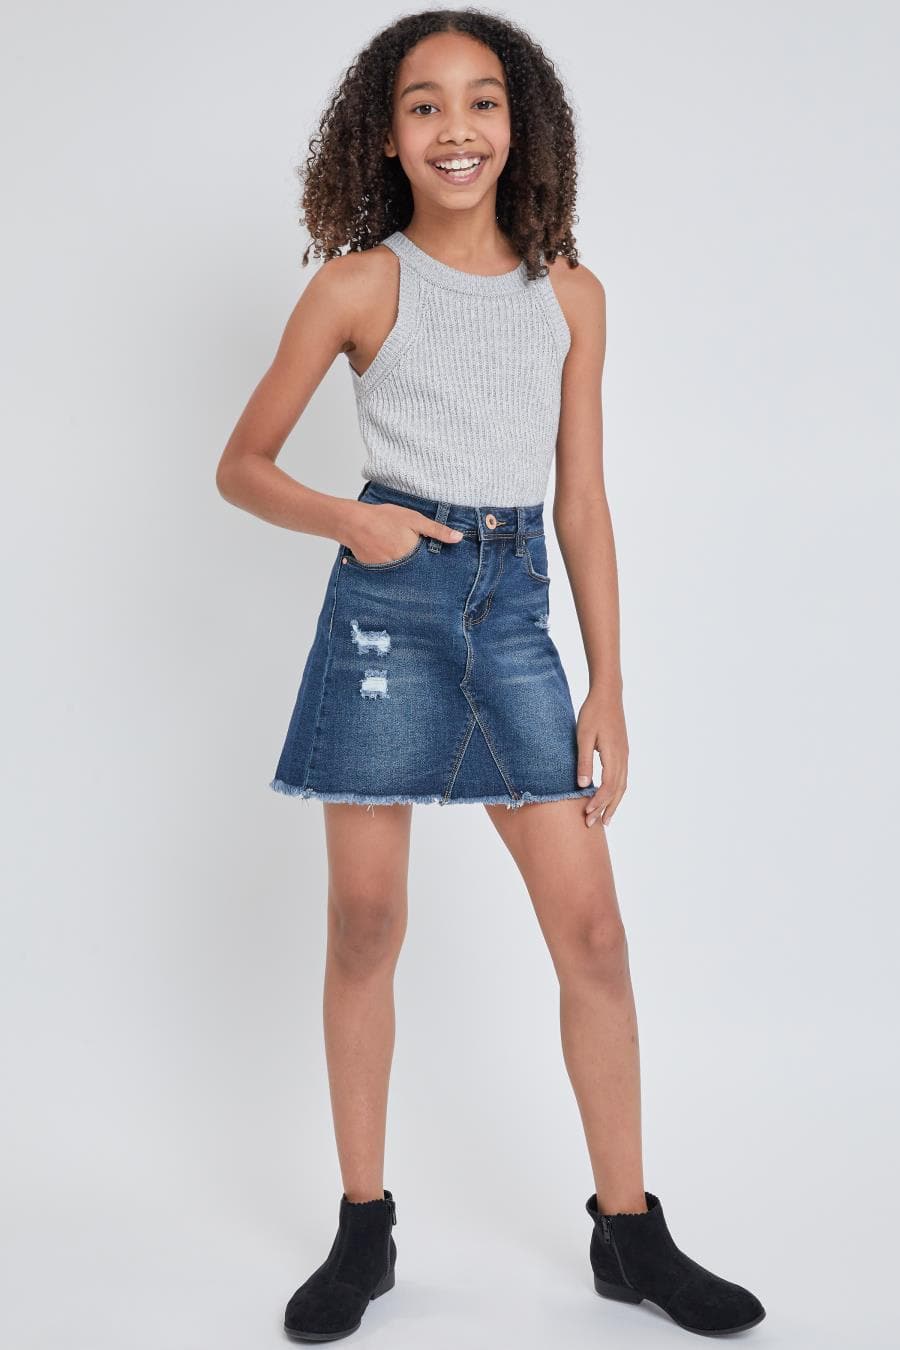 SALE／93%OFF】【SALE／93%OFF】DISTRESSED DENIM SKIRT X-girl その他